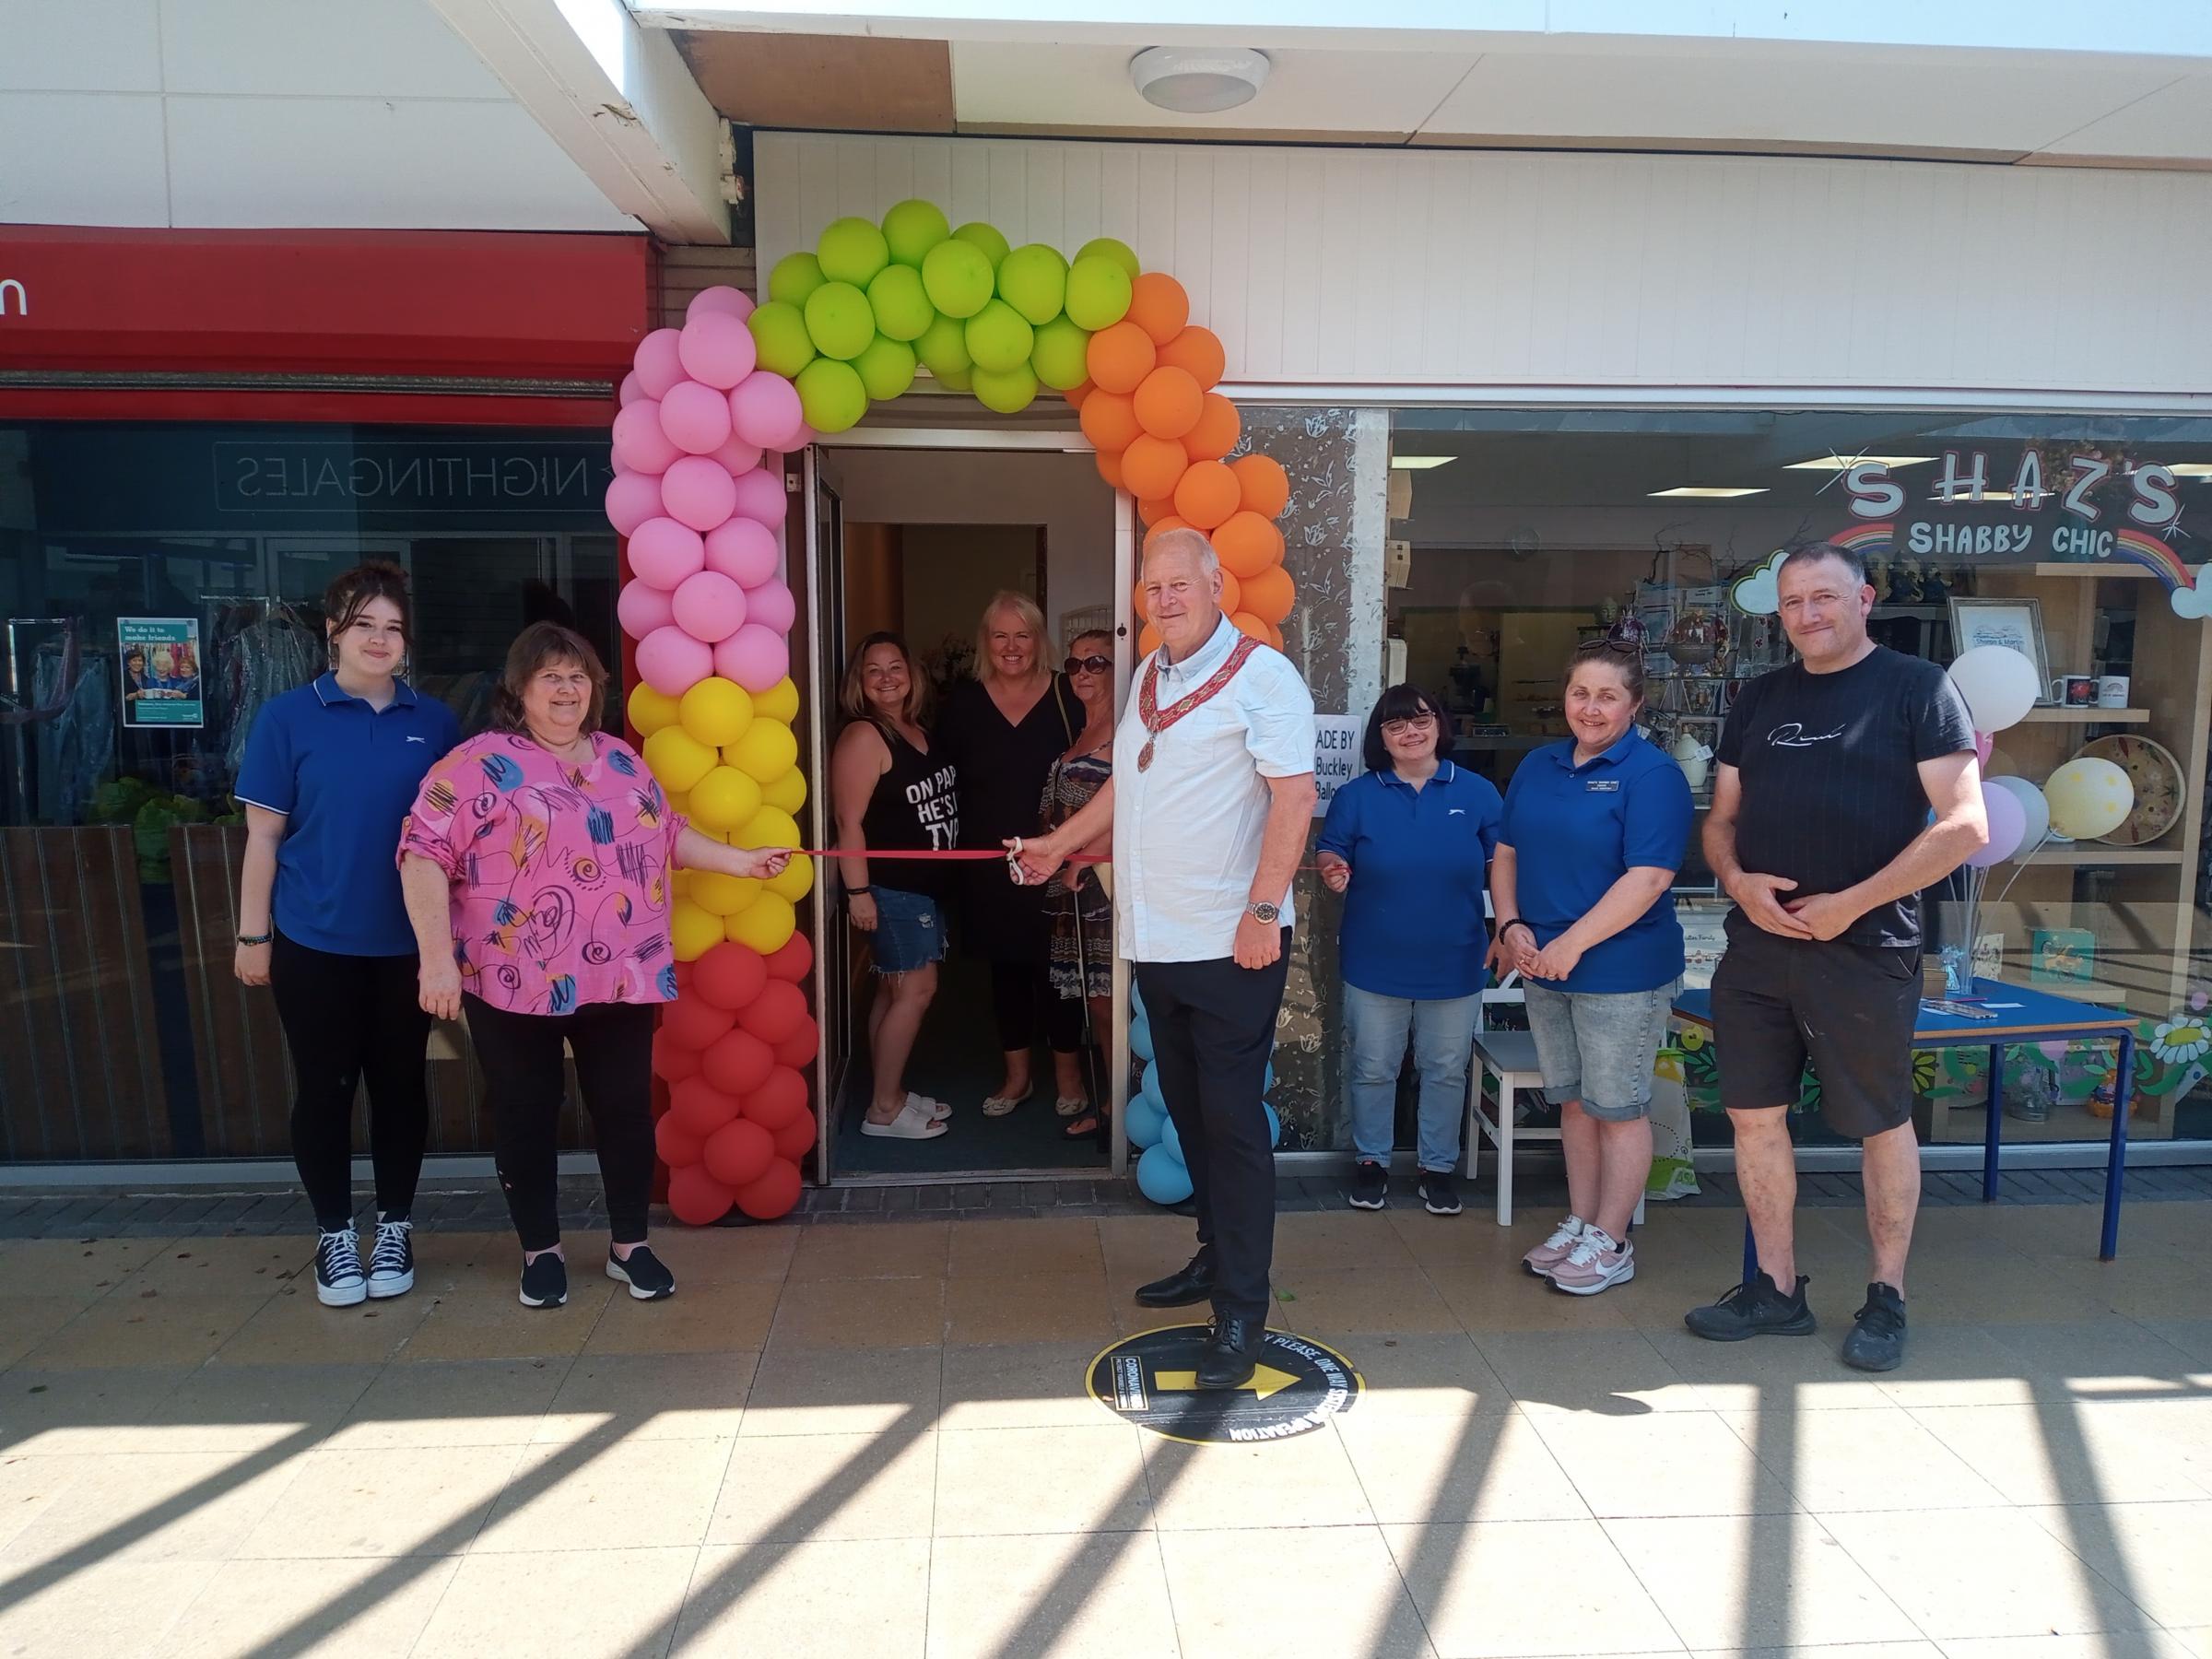 The new wellness centre is opened in Buckley Shopping Cenre, with, from left: Tegan Evans, Sharon Beck, Nicola Bythyn, Joanne Evans, Cllr Charles Cordery, Kay Rathbone, Cerys Walter and Martin Beck.